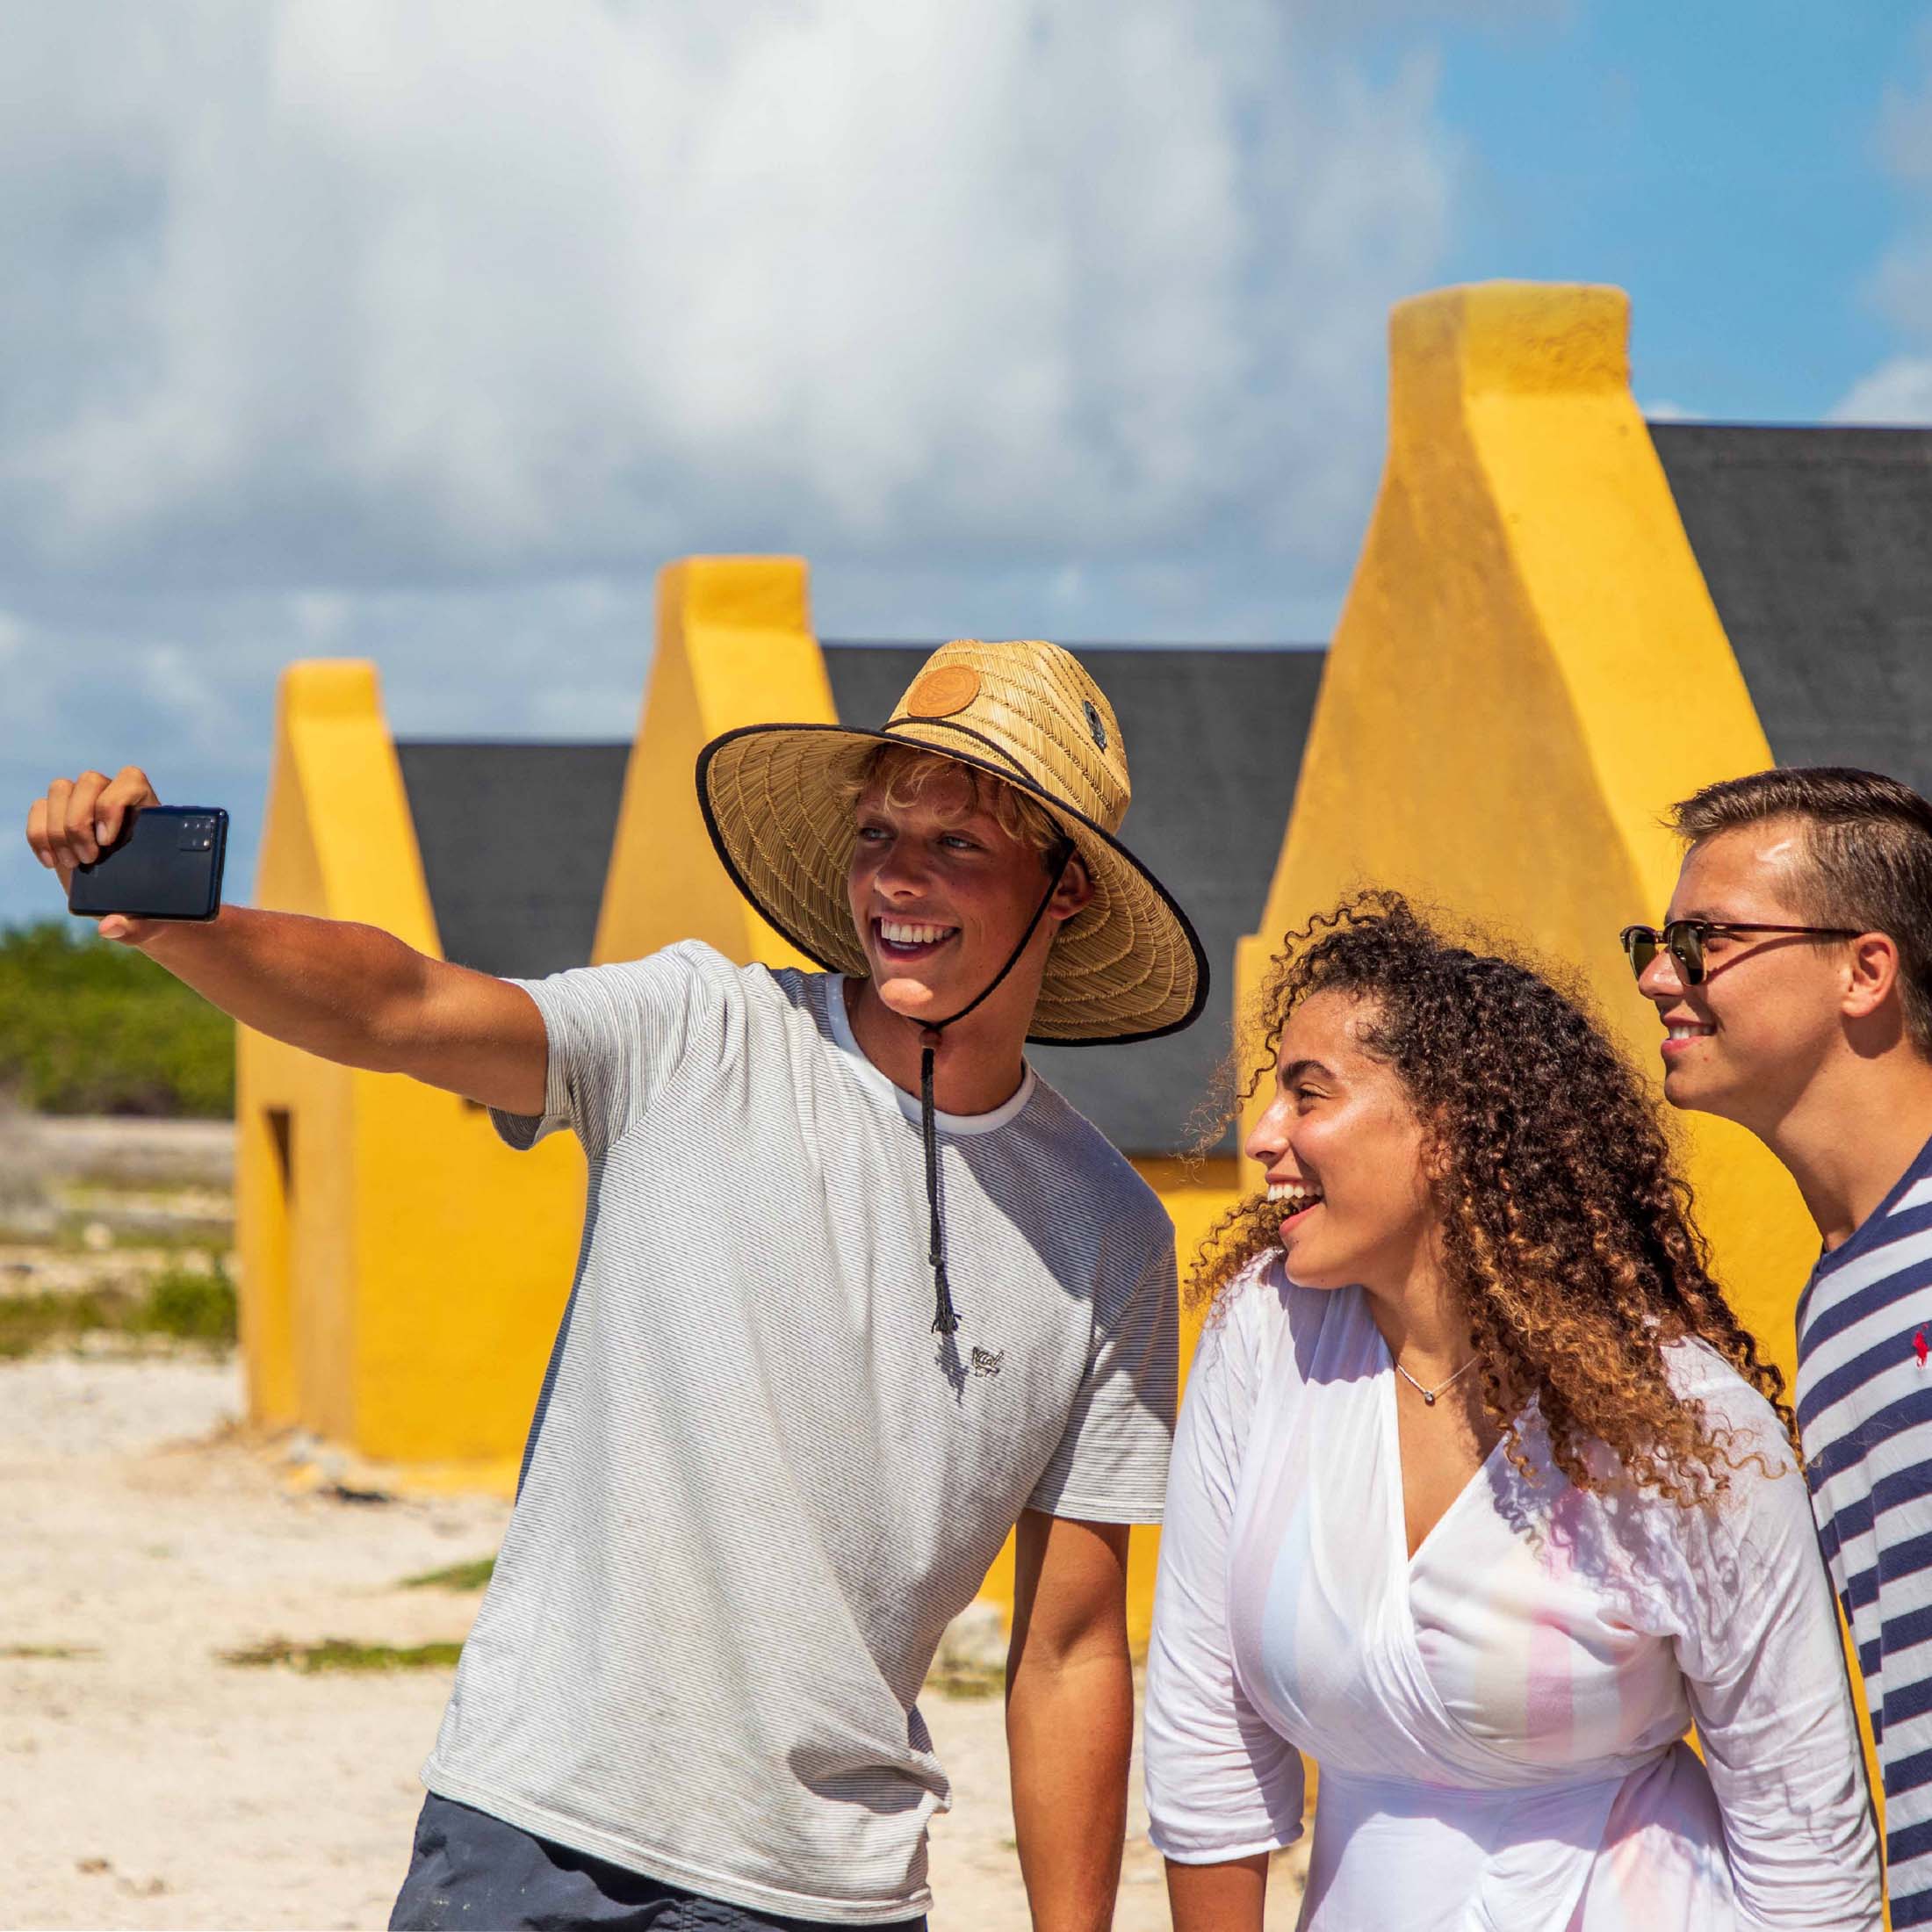 Group of friends taking selfie near historical site